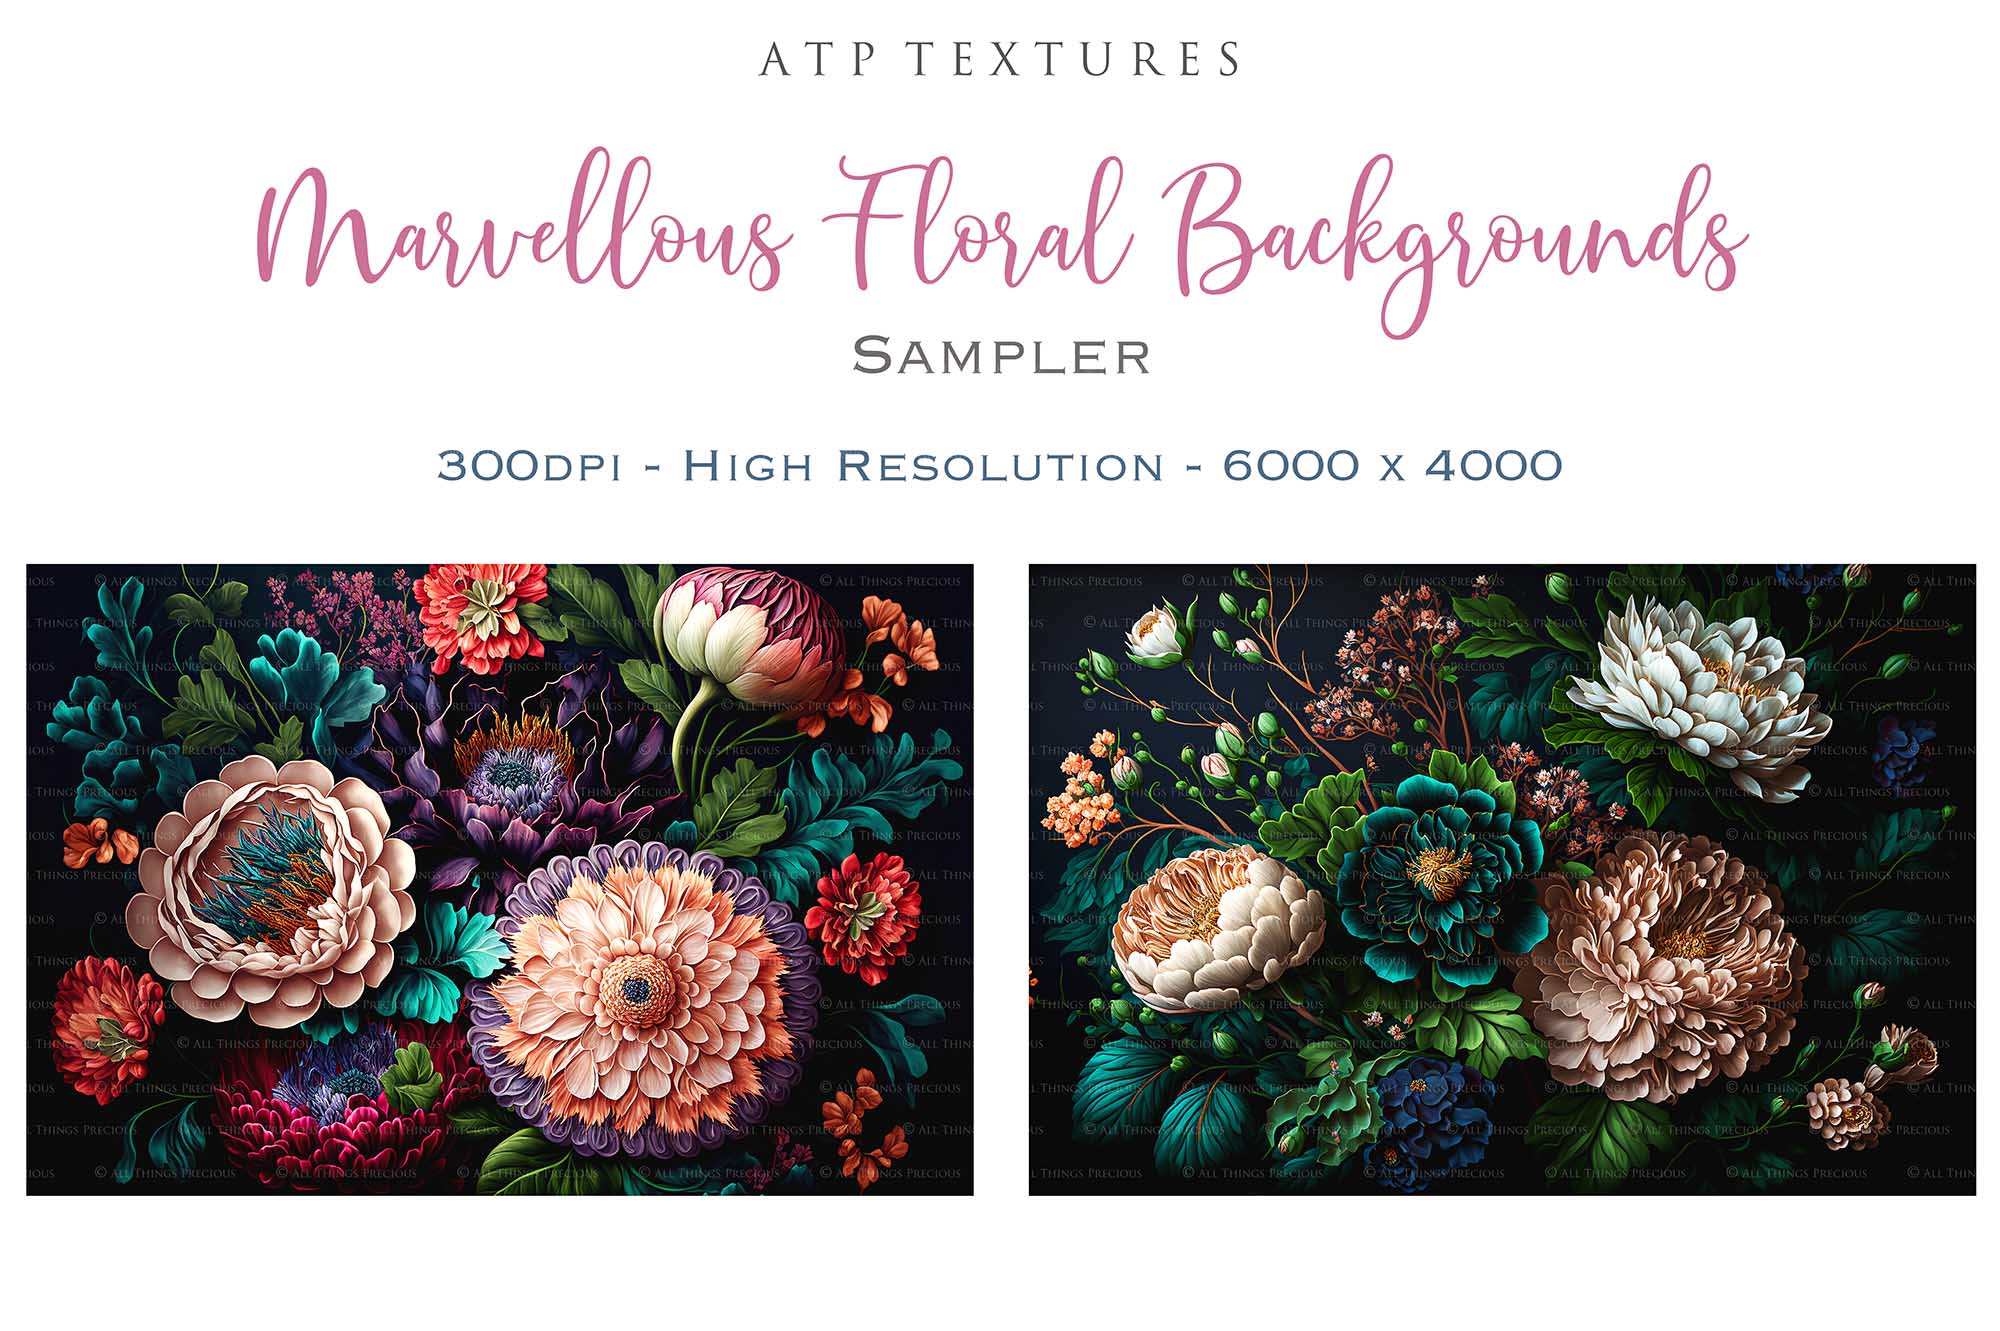 Digital Background for photography, digital art and print. Flower backgrounds are in high resolution, 300dpi, in rich colours. These are created in AI and have been edited, resized and created with photographers in mind. Print as a backdrop or art.